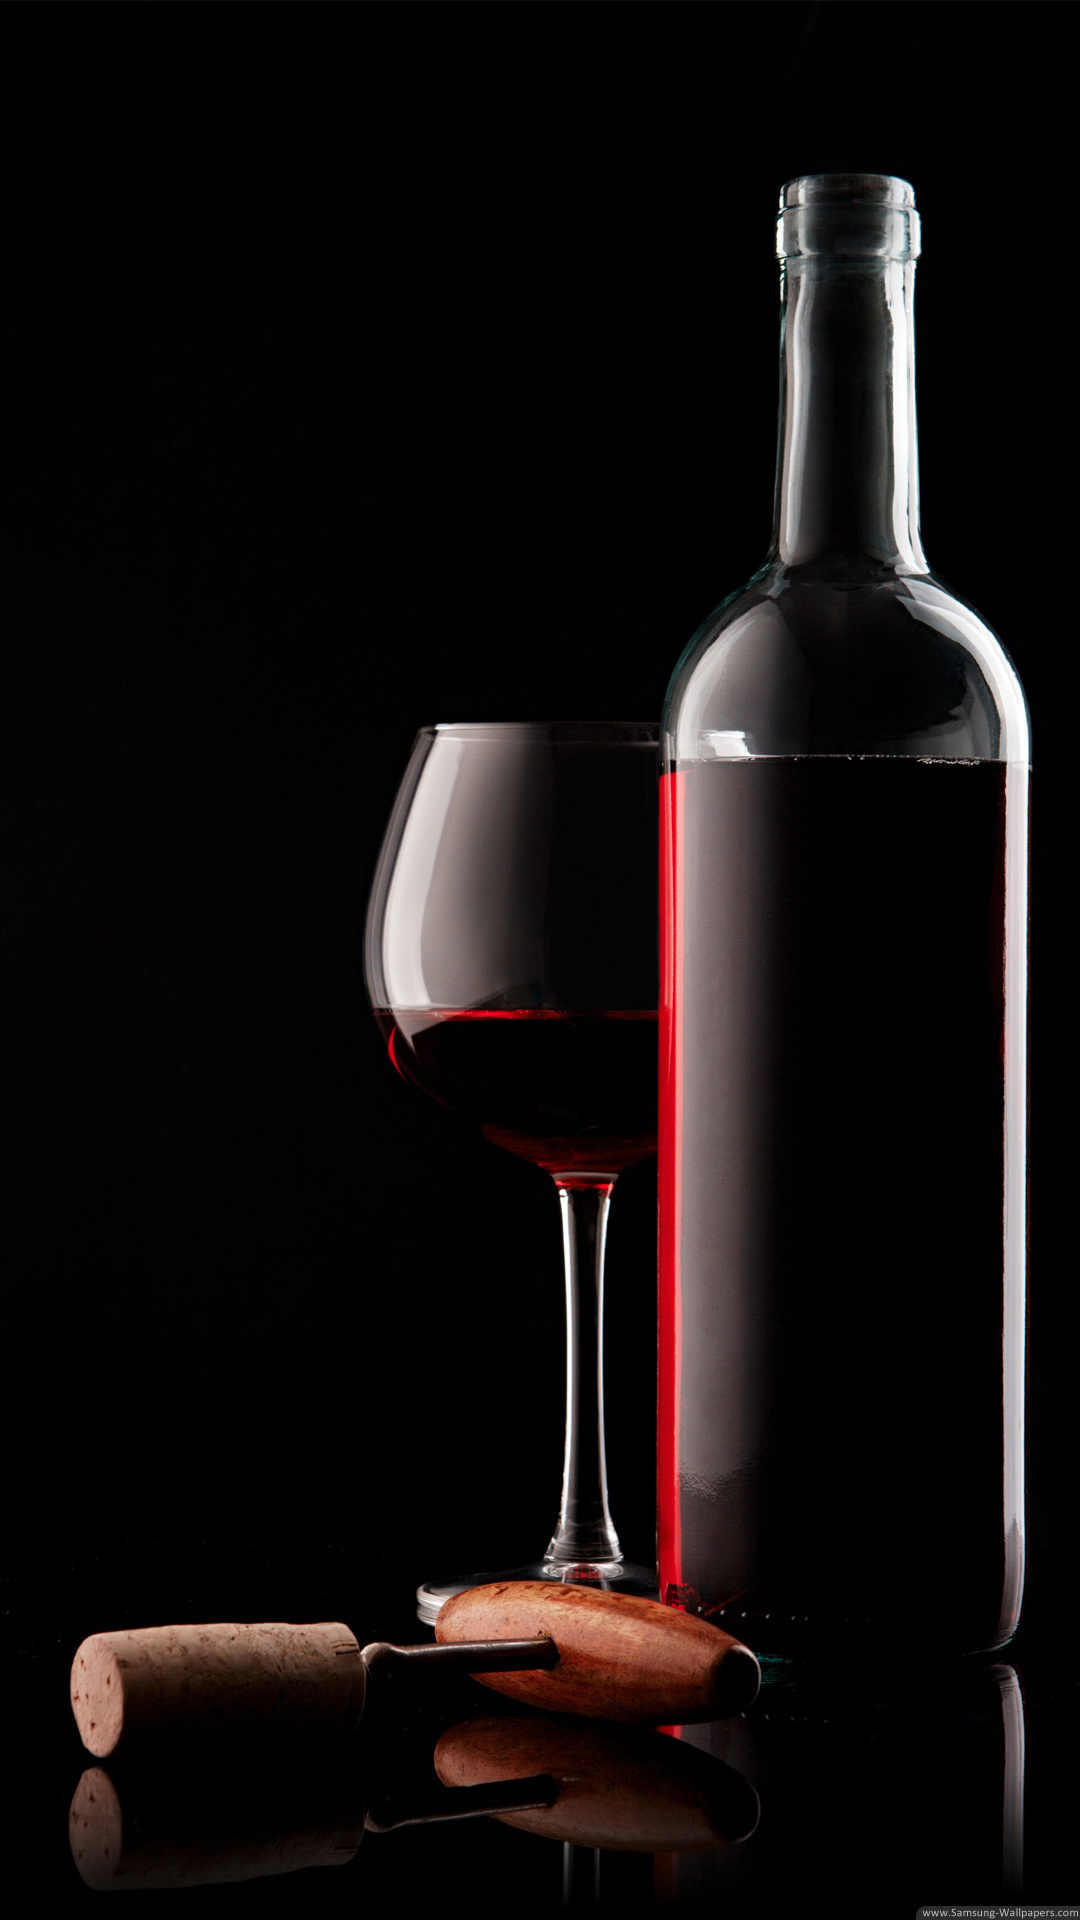 Wine bottle, Red wine, HTC one M9 wallpaper, Stylish and sophisticated, 1080x1920 Full HD Phone